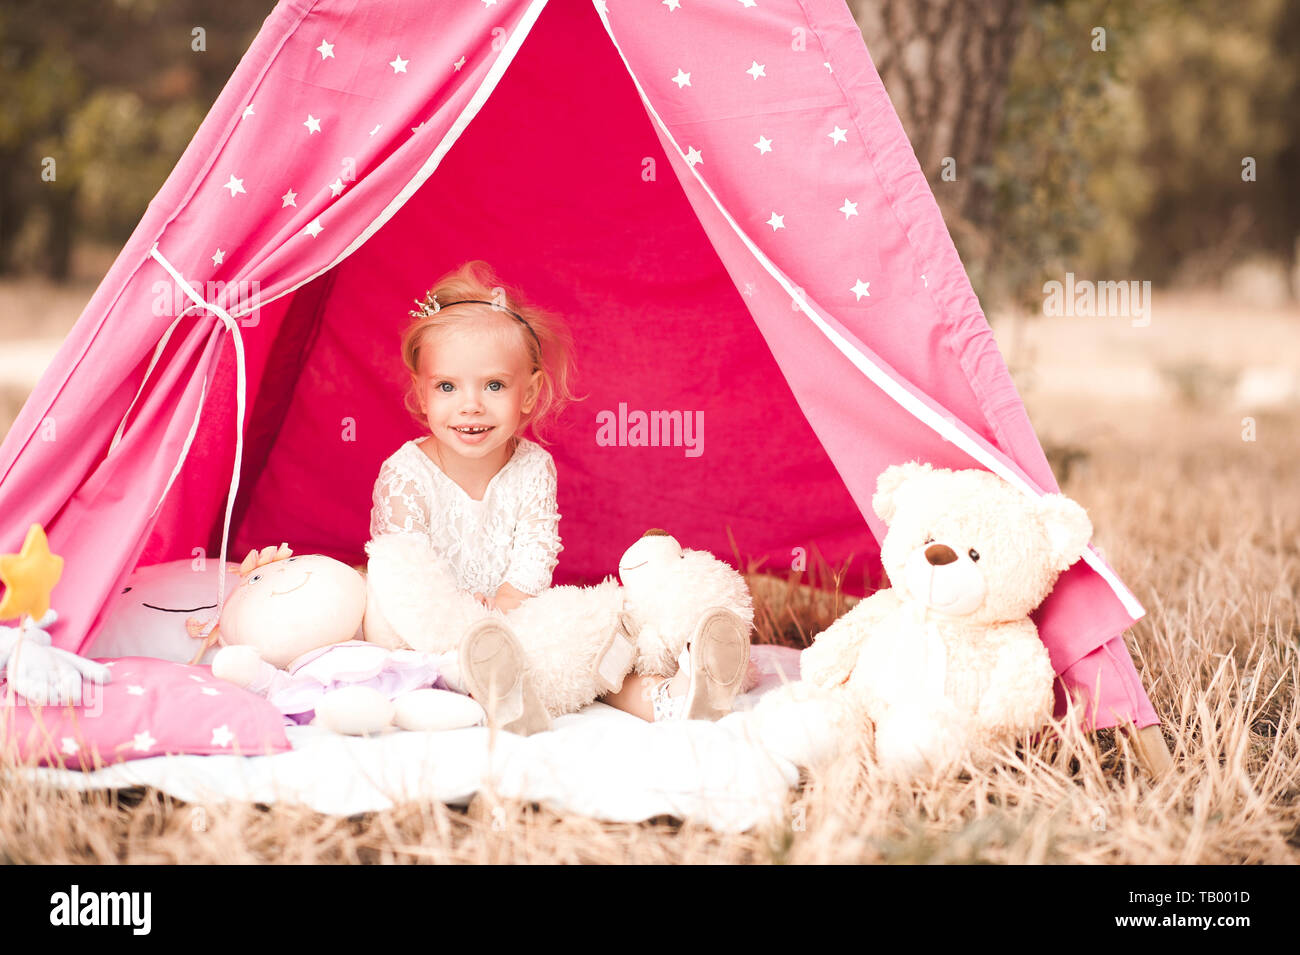 Cute baby girl 2-3 year old sitting playing with toys at back yard outdoors Stock Photo